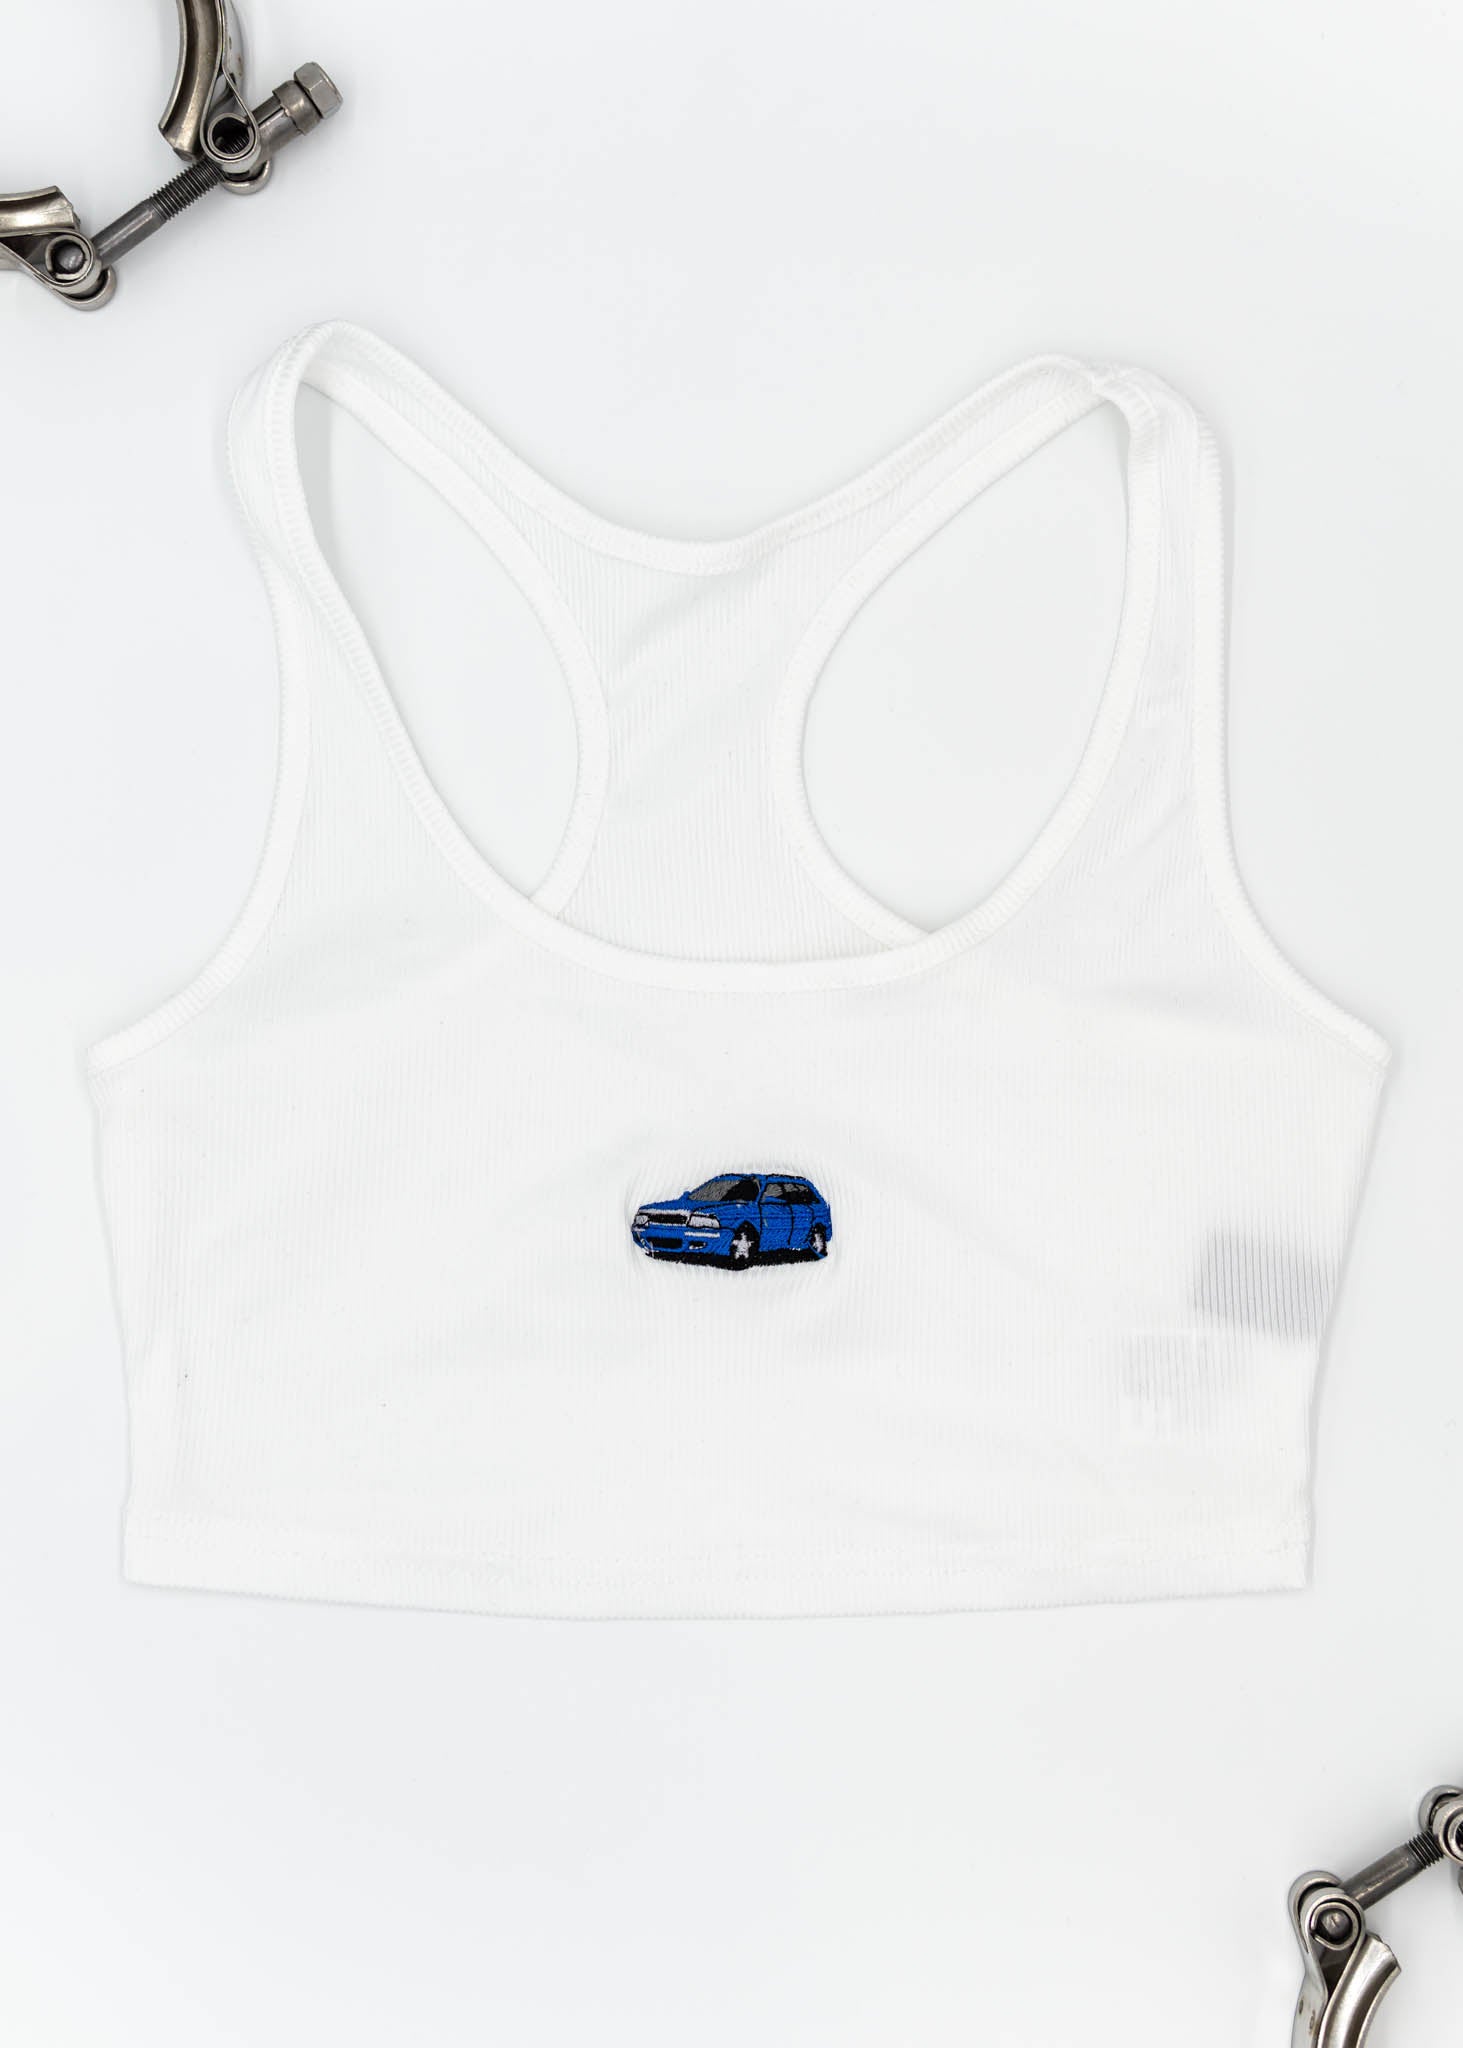 A white Audi crop top for women. Photo is a front view of the top with an embroidered Nogaro Blue Audi 80 RS2 Avant made by Porsche. Fabric composition is polyester, and cotton. The material is stretchy, ribbed, and non-transparent. The style of this shirt is sleeveless, with a scoop neckline.